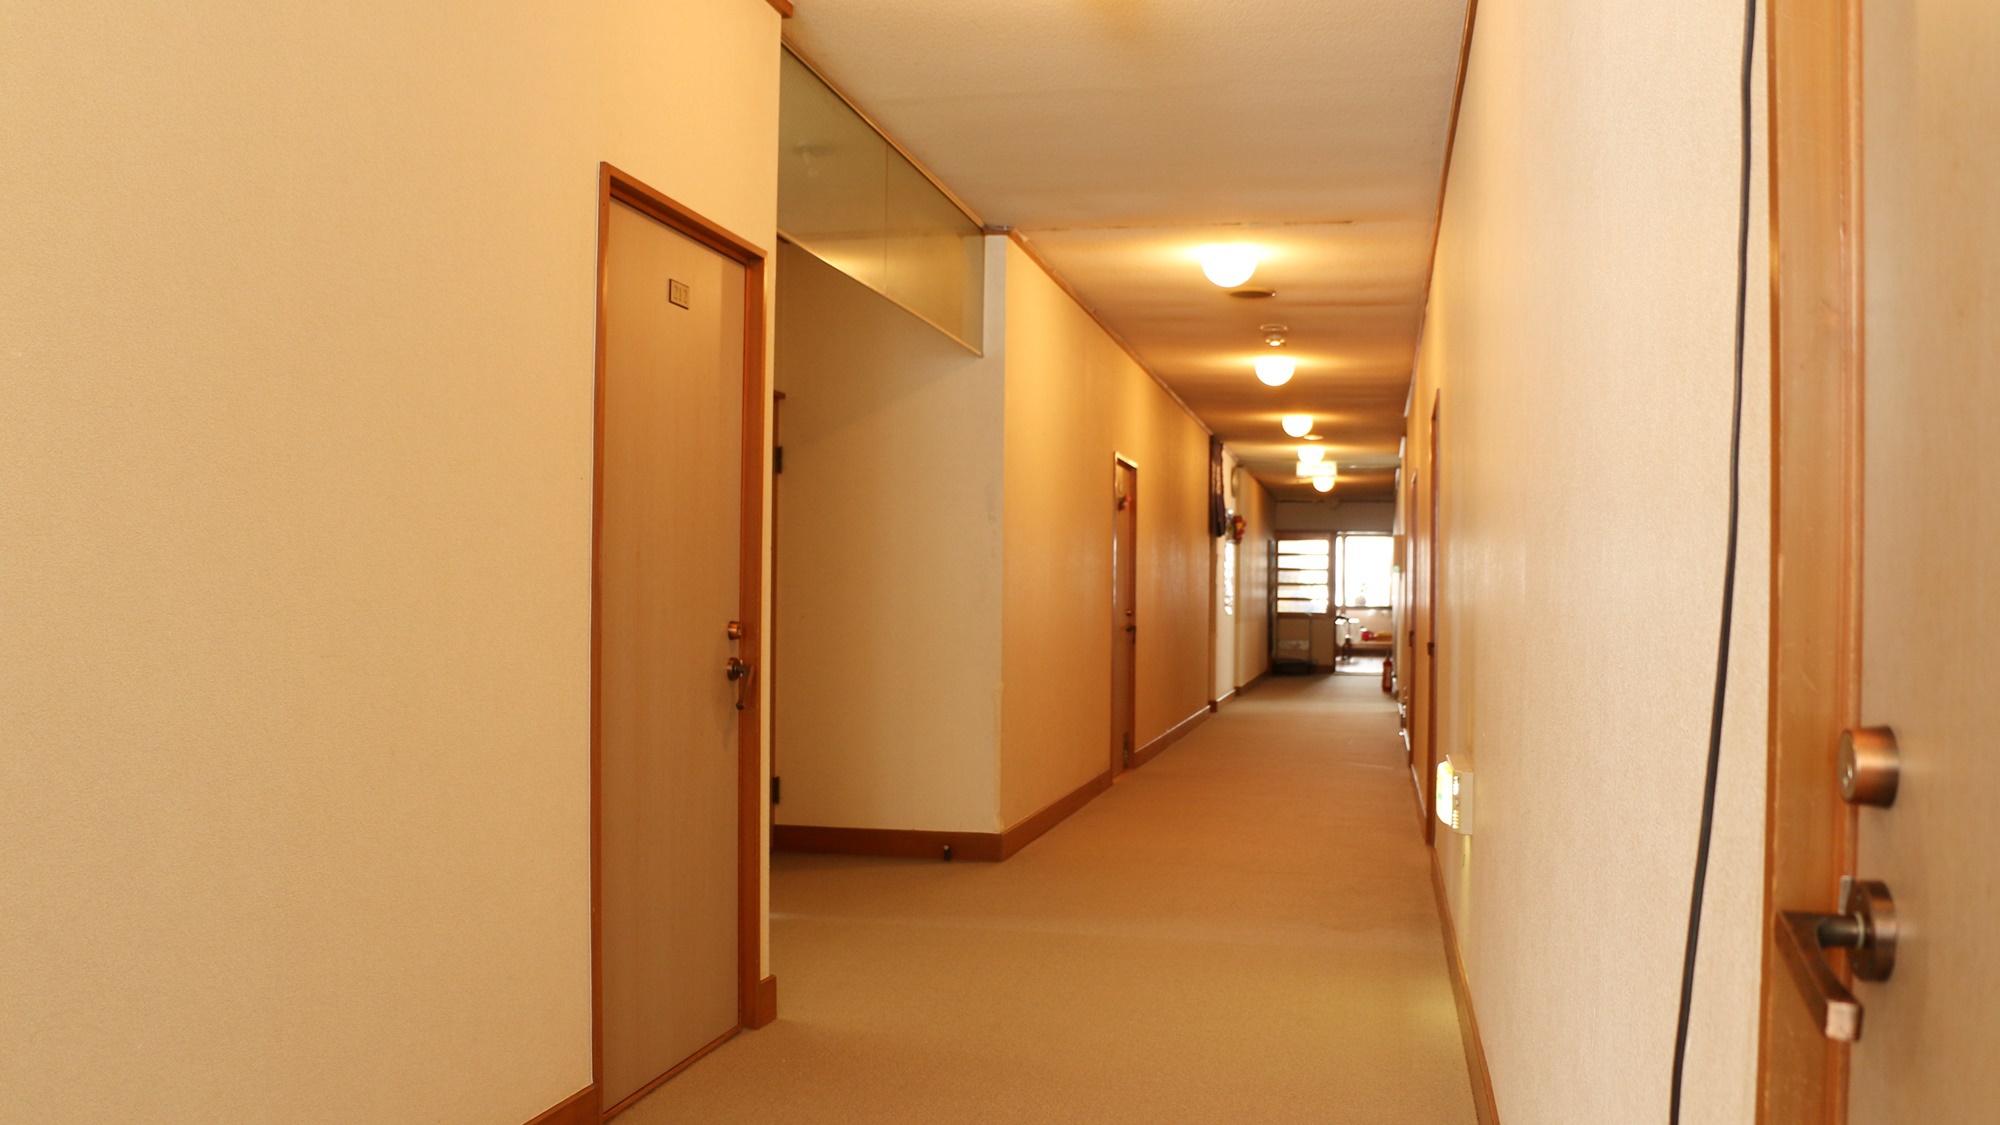 Minshuku Akasakata Minshuku Akasakata is perfectly located for both business and leisure guests in Hachimantai. Both business travelers and tourists can enjoy the propertys facilities and services. To be found at the p